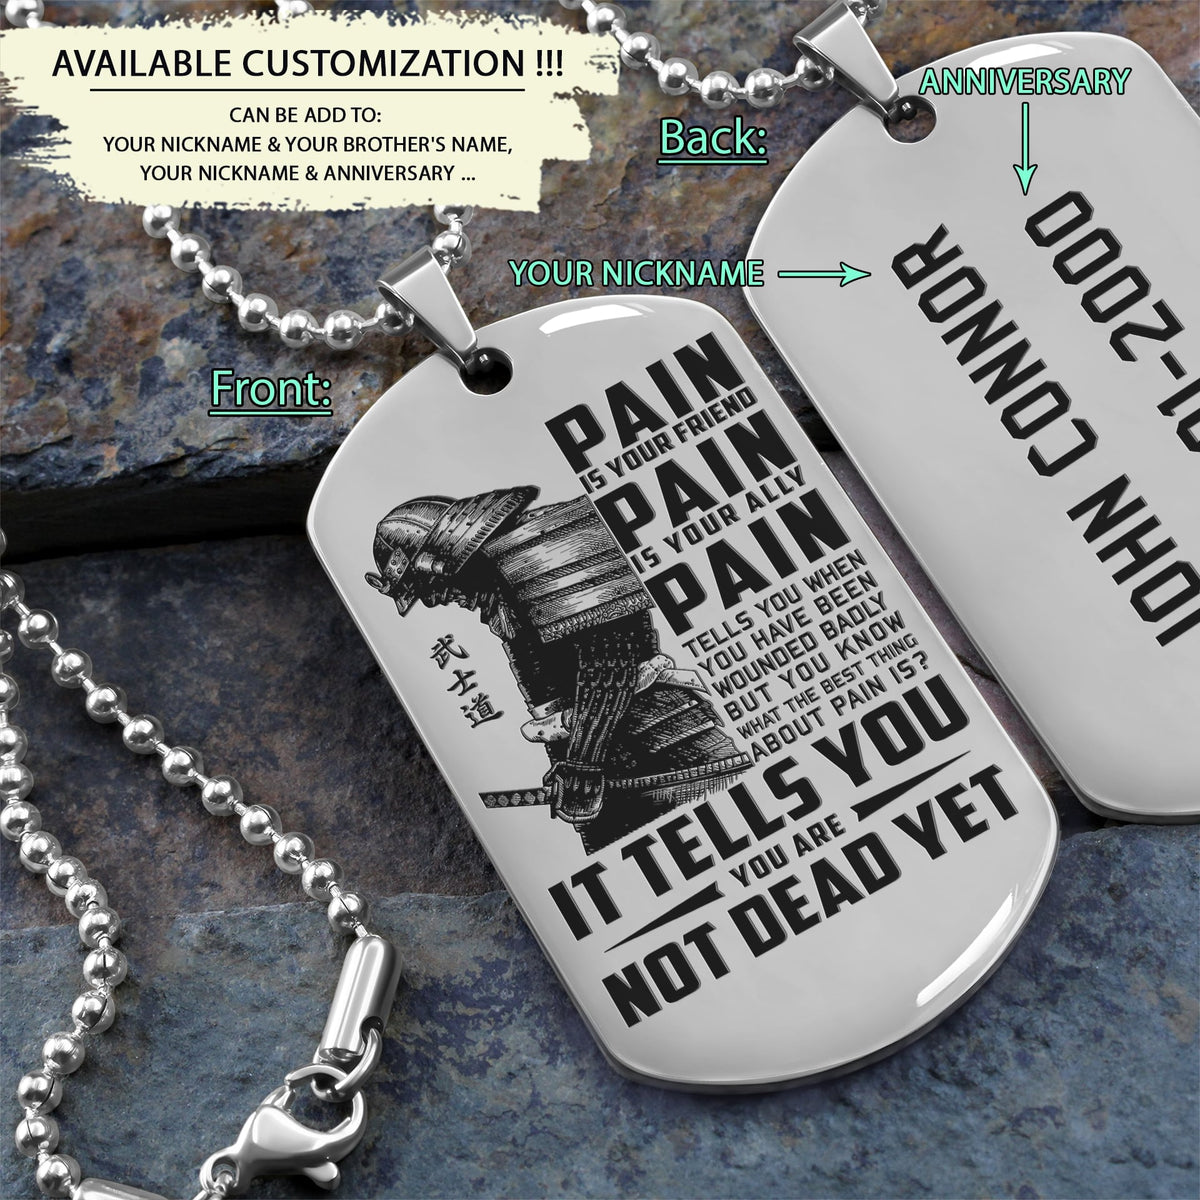 SAD014 - PAIN - You Are Not Dead Yet - Samurai - Engrave Silver Dog Tag